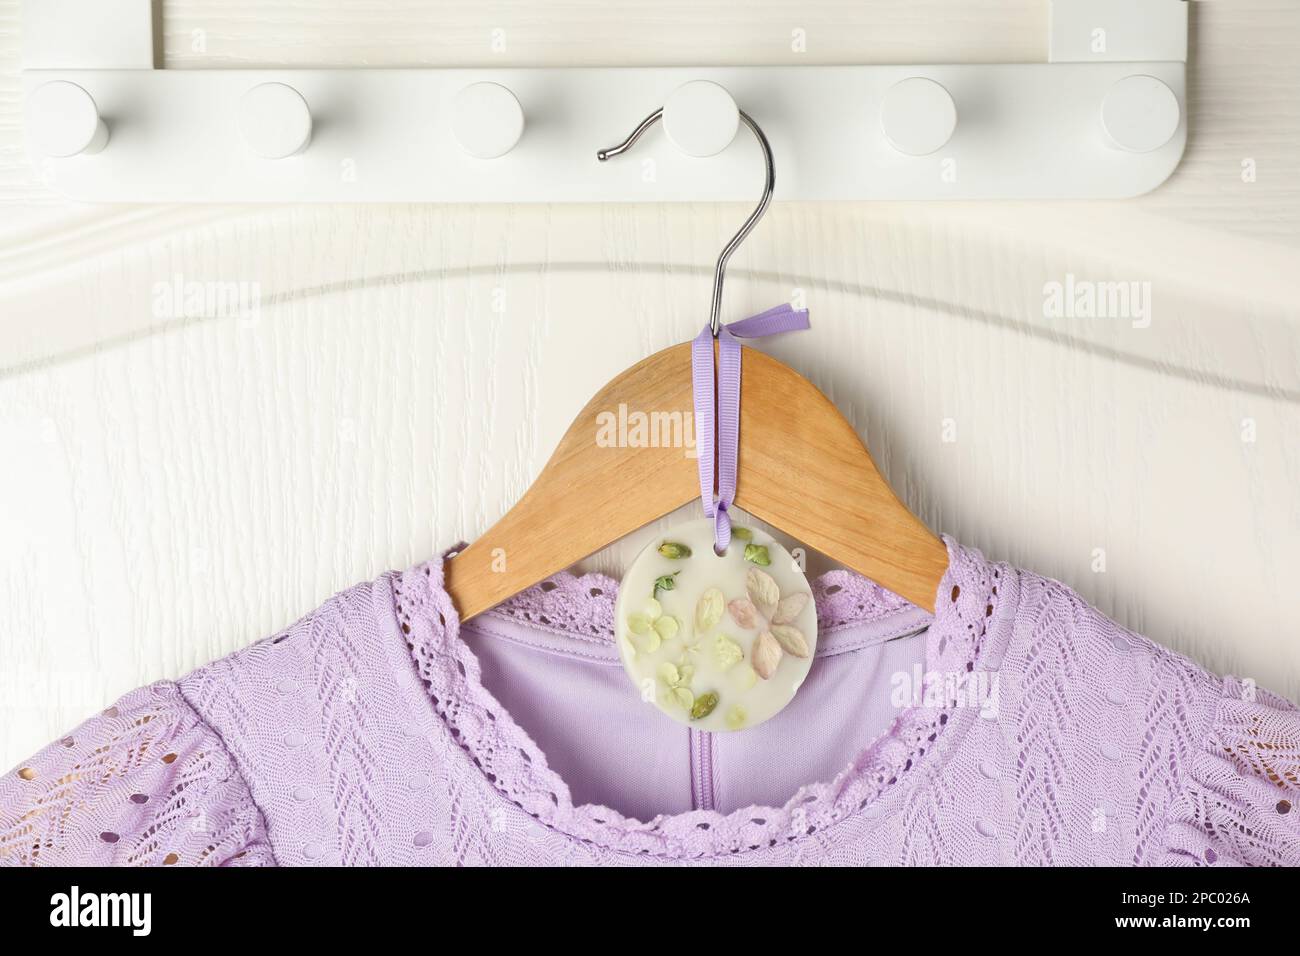 https://c8.alamy.com/comp/2PC026A/scented-sachet-with-flowers-and-stylish-clothes-on-hanger-2PC026A.jpg